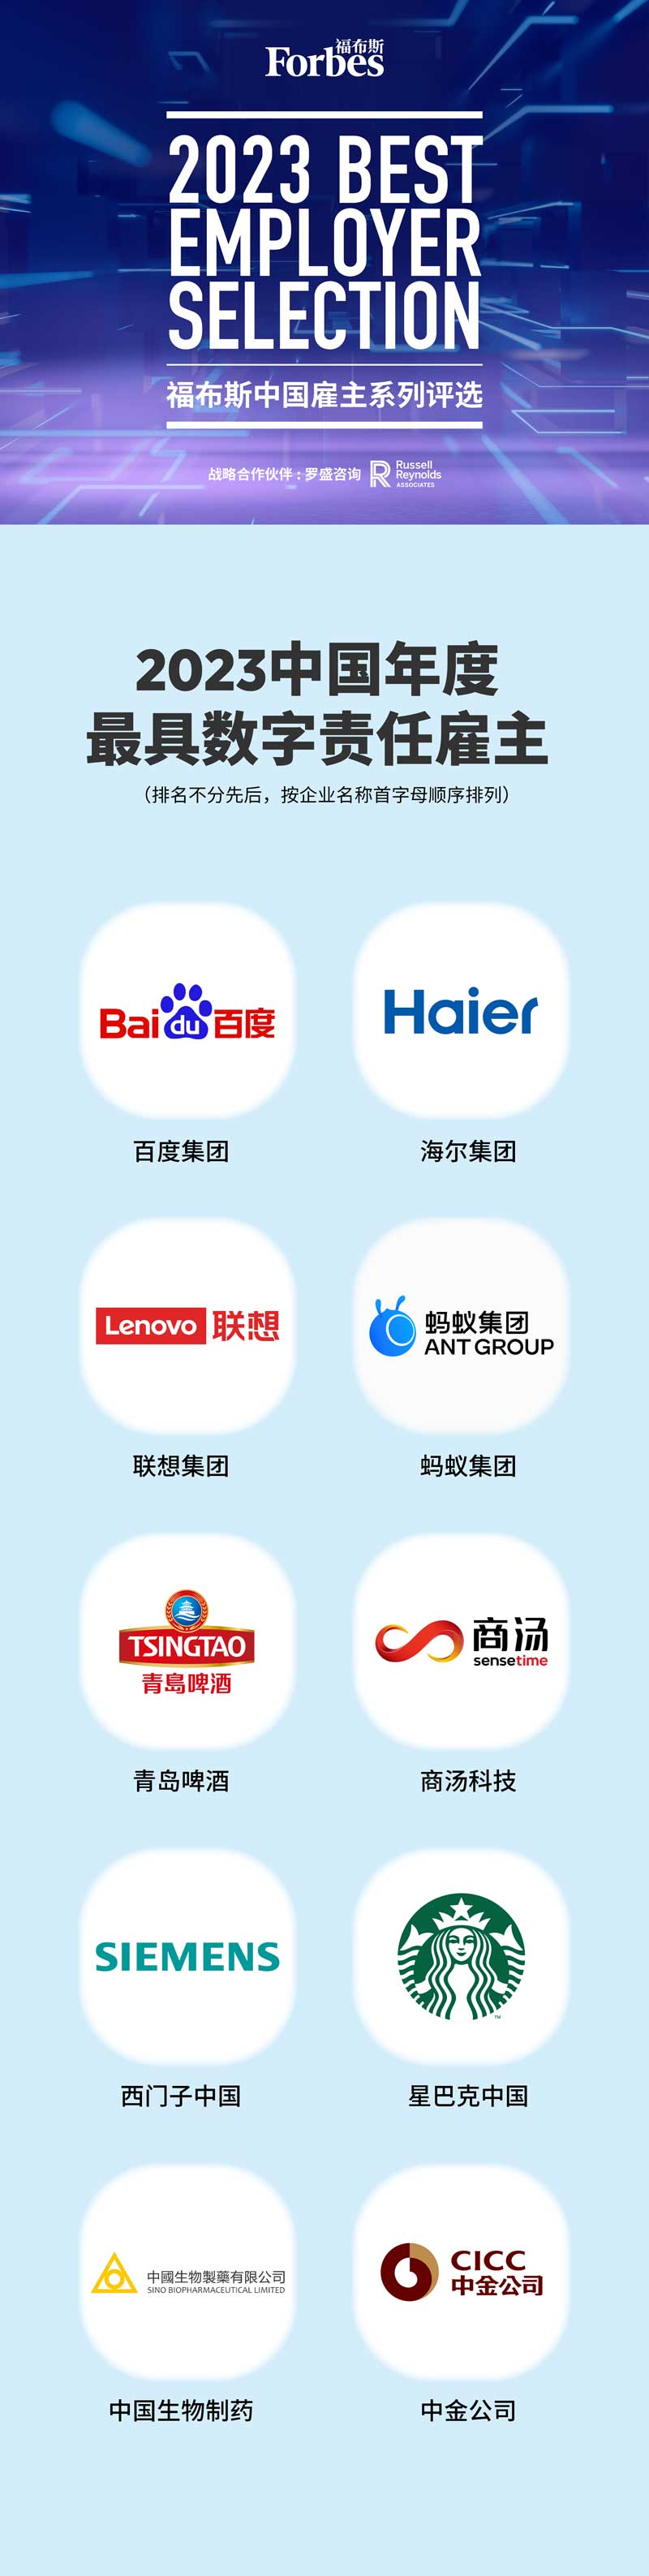 Forbes China best employer - Digital category